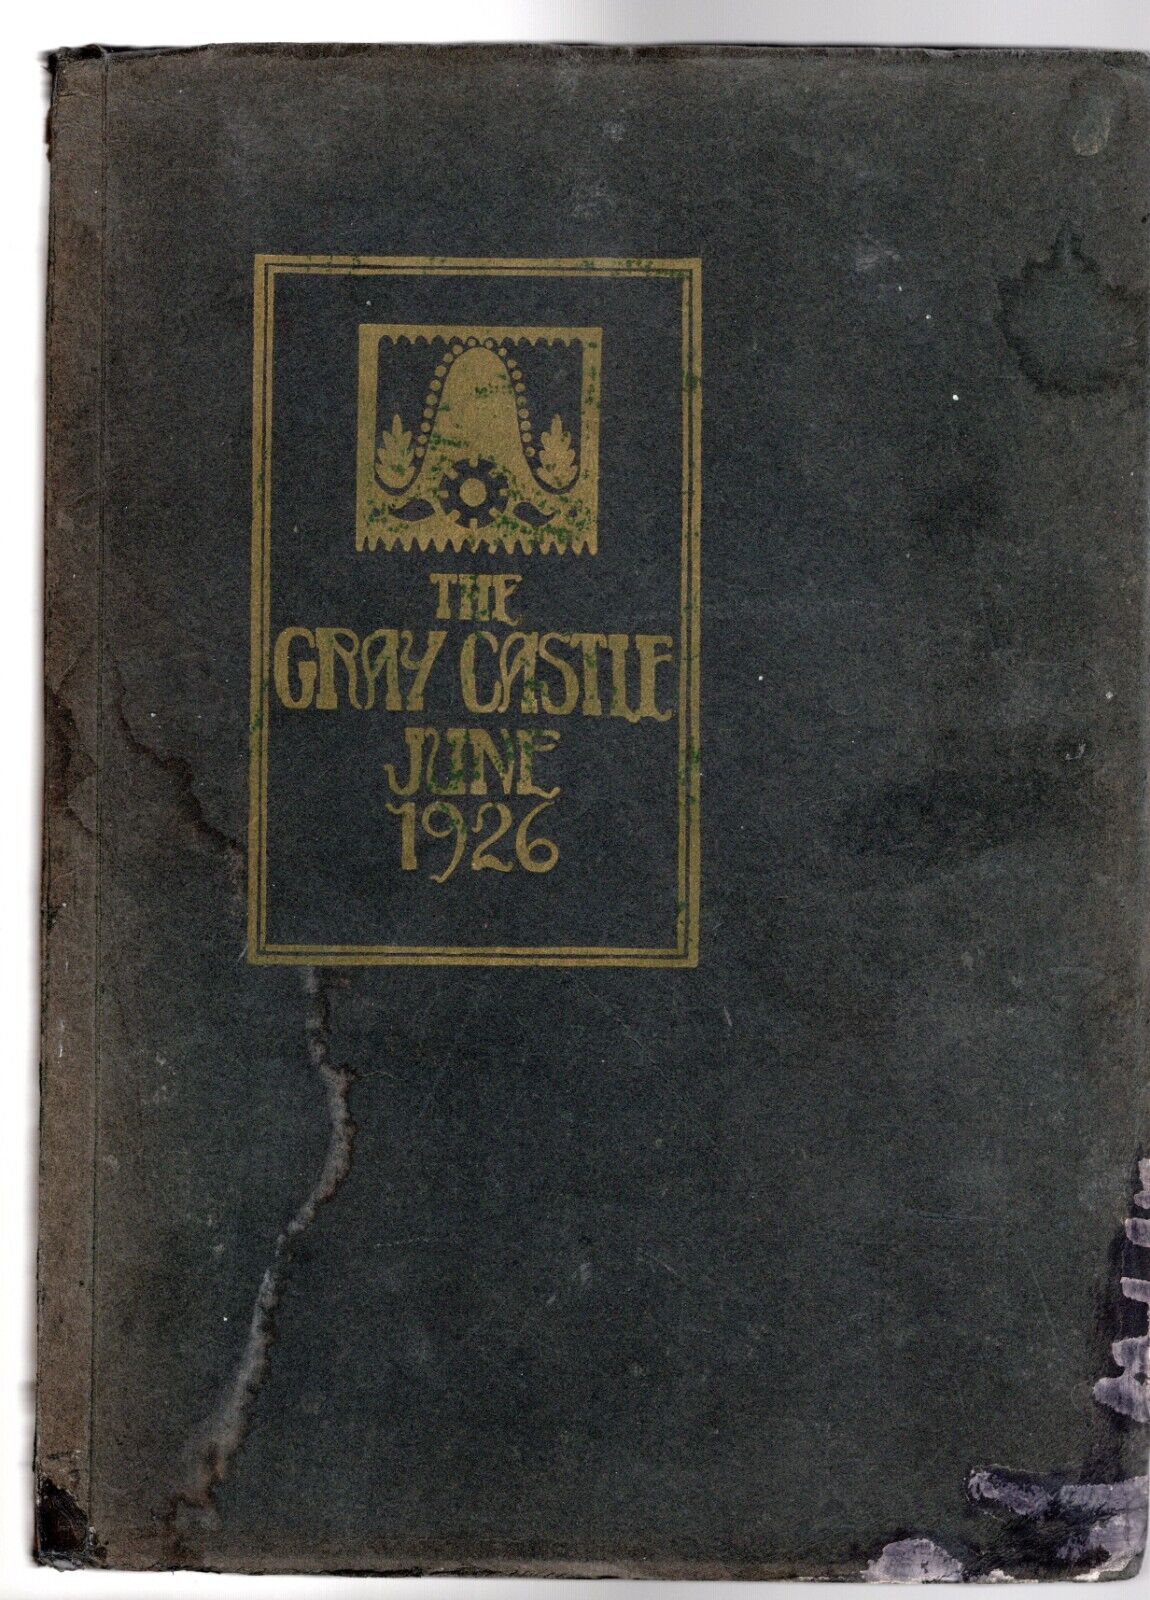 1926 SAN DIEGO HIGH YEARBOOK